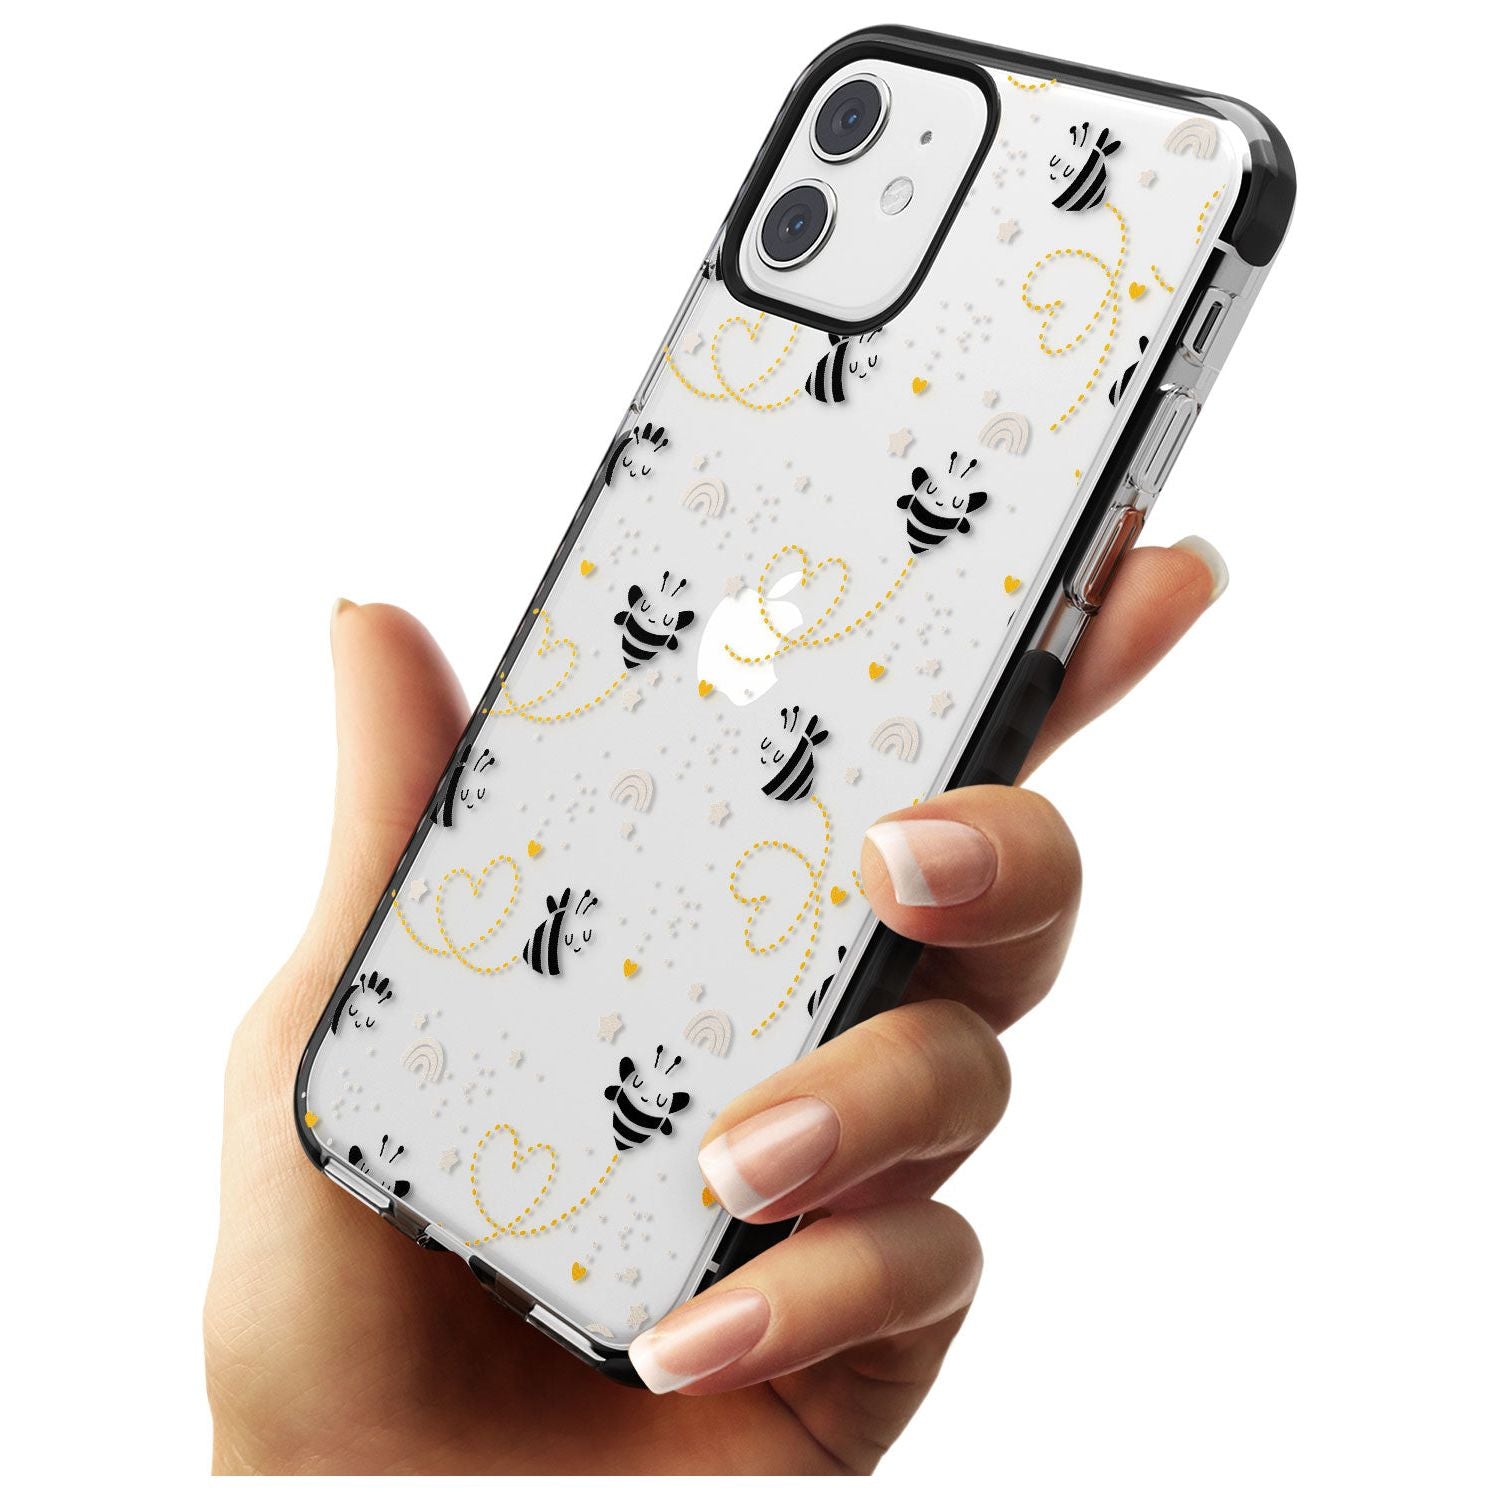 Sweet as Honey Patterns: Bees & Hearts (Clear) Black Impact Phone Case for iPhone 11